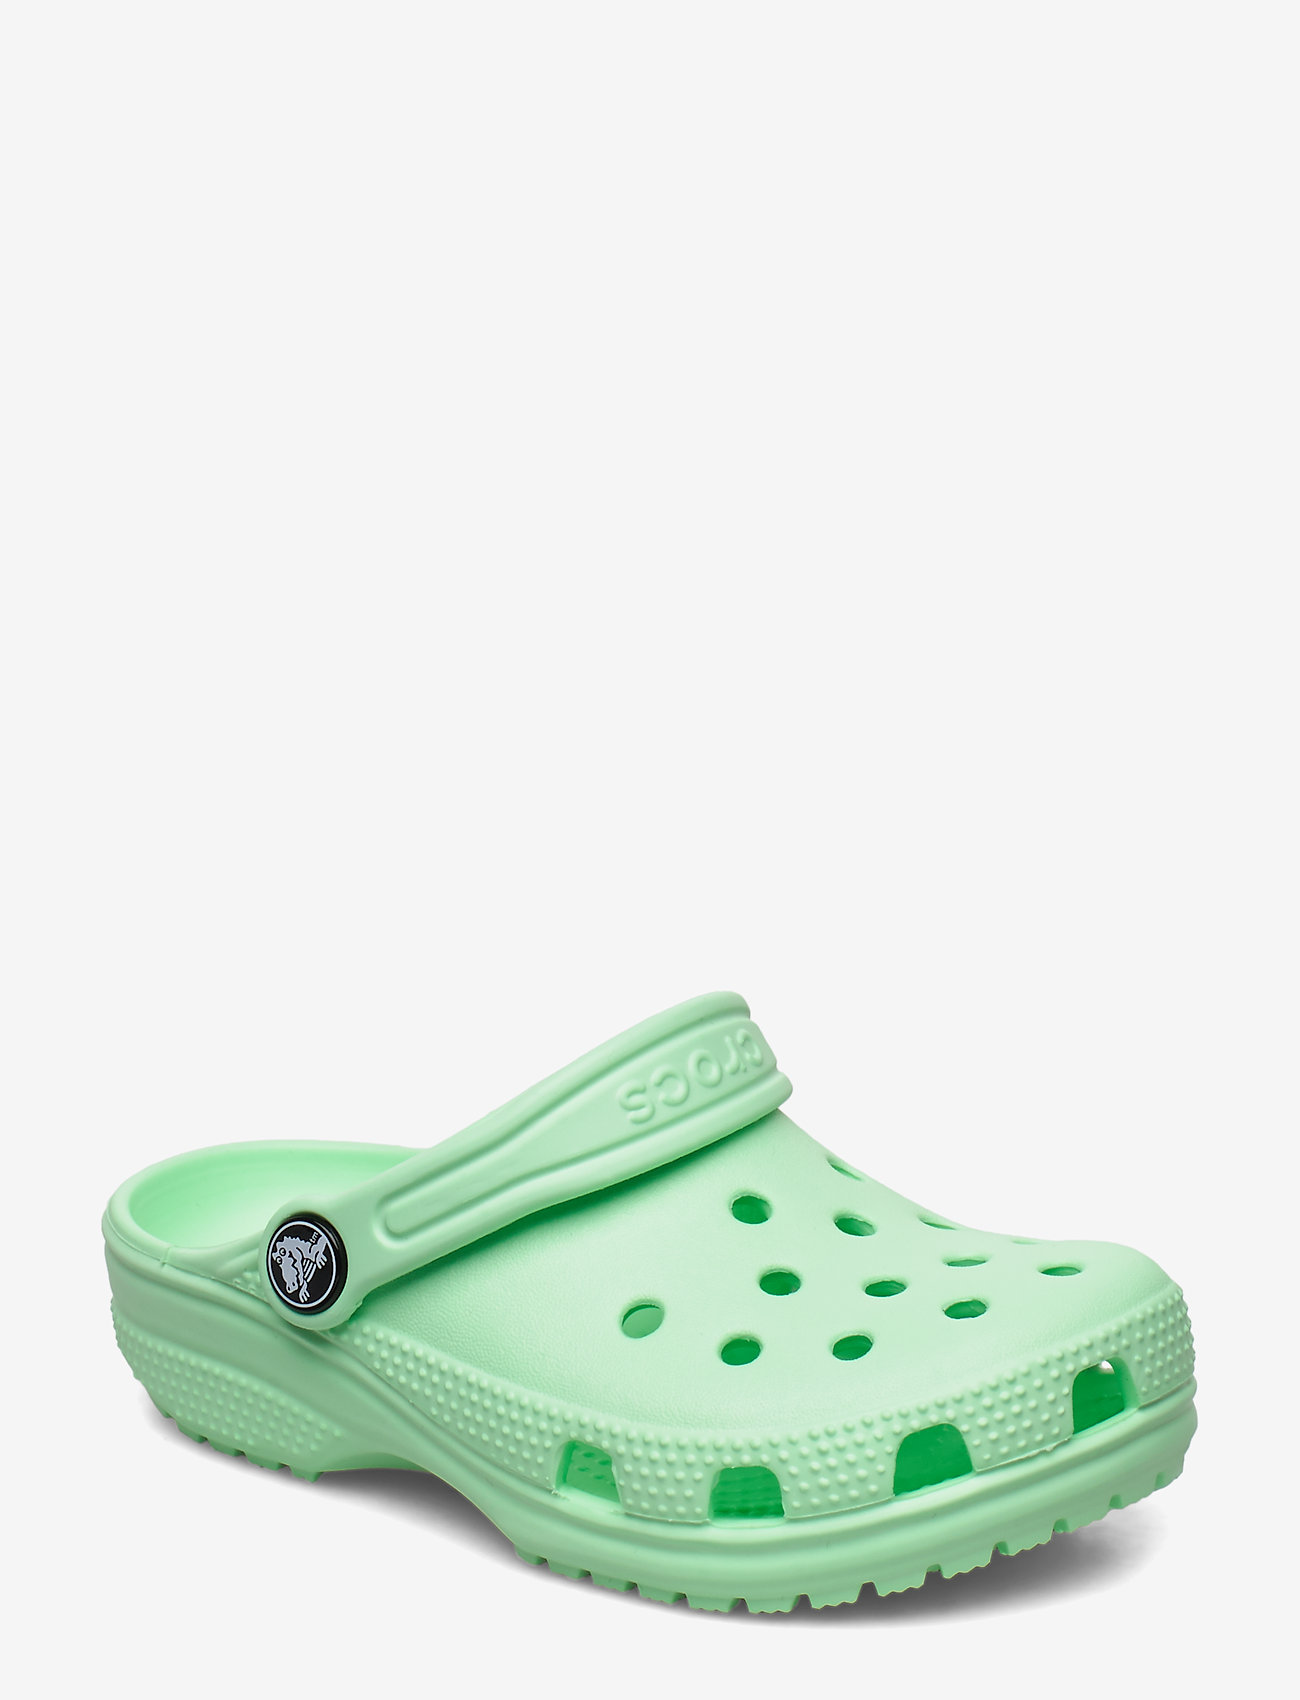 letters to put on crocs